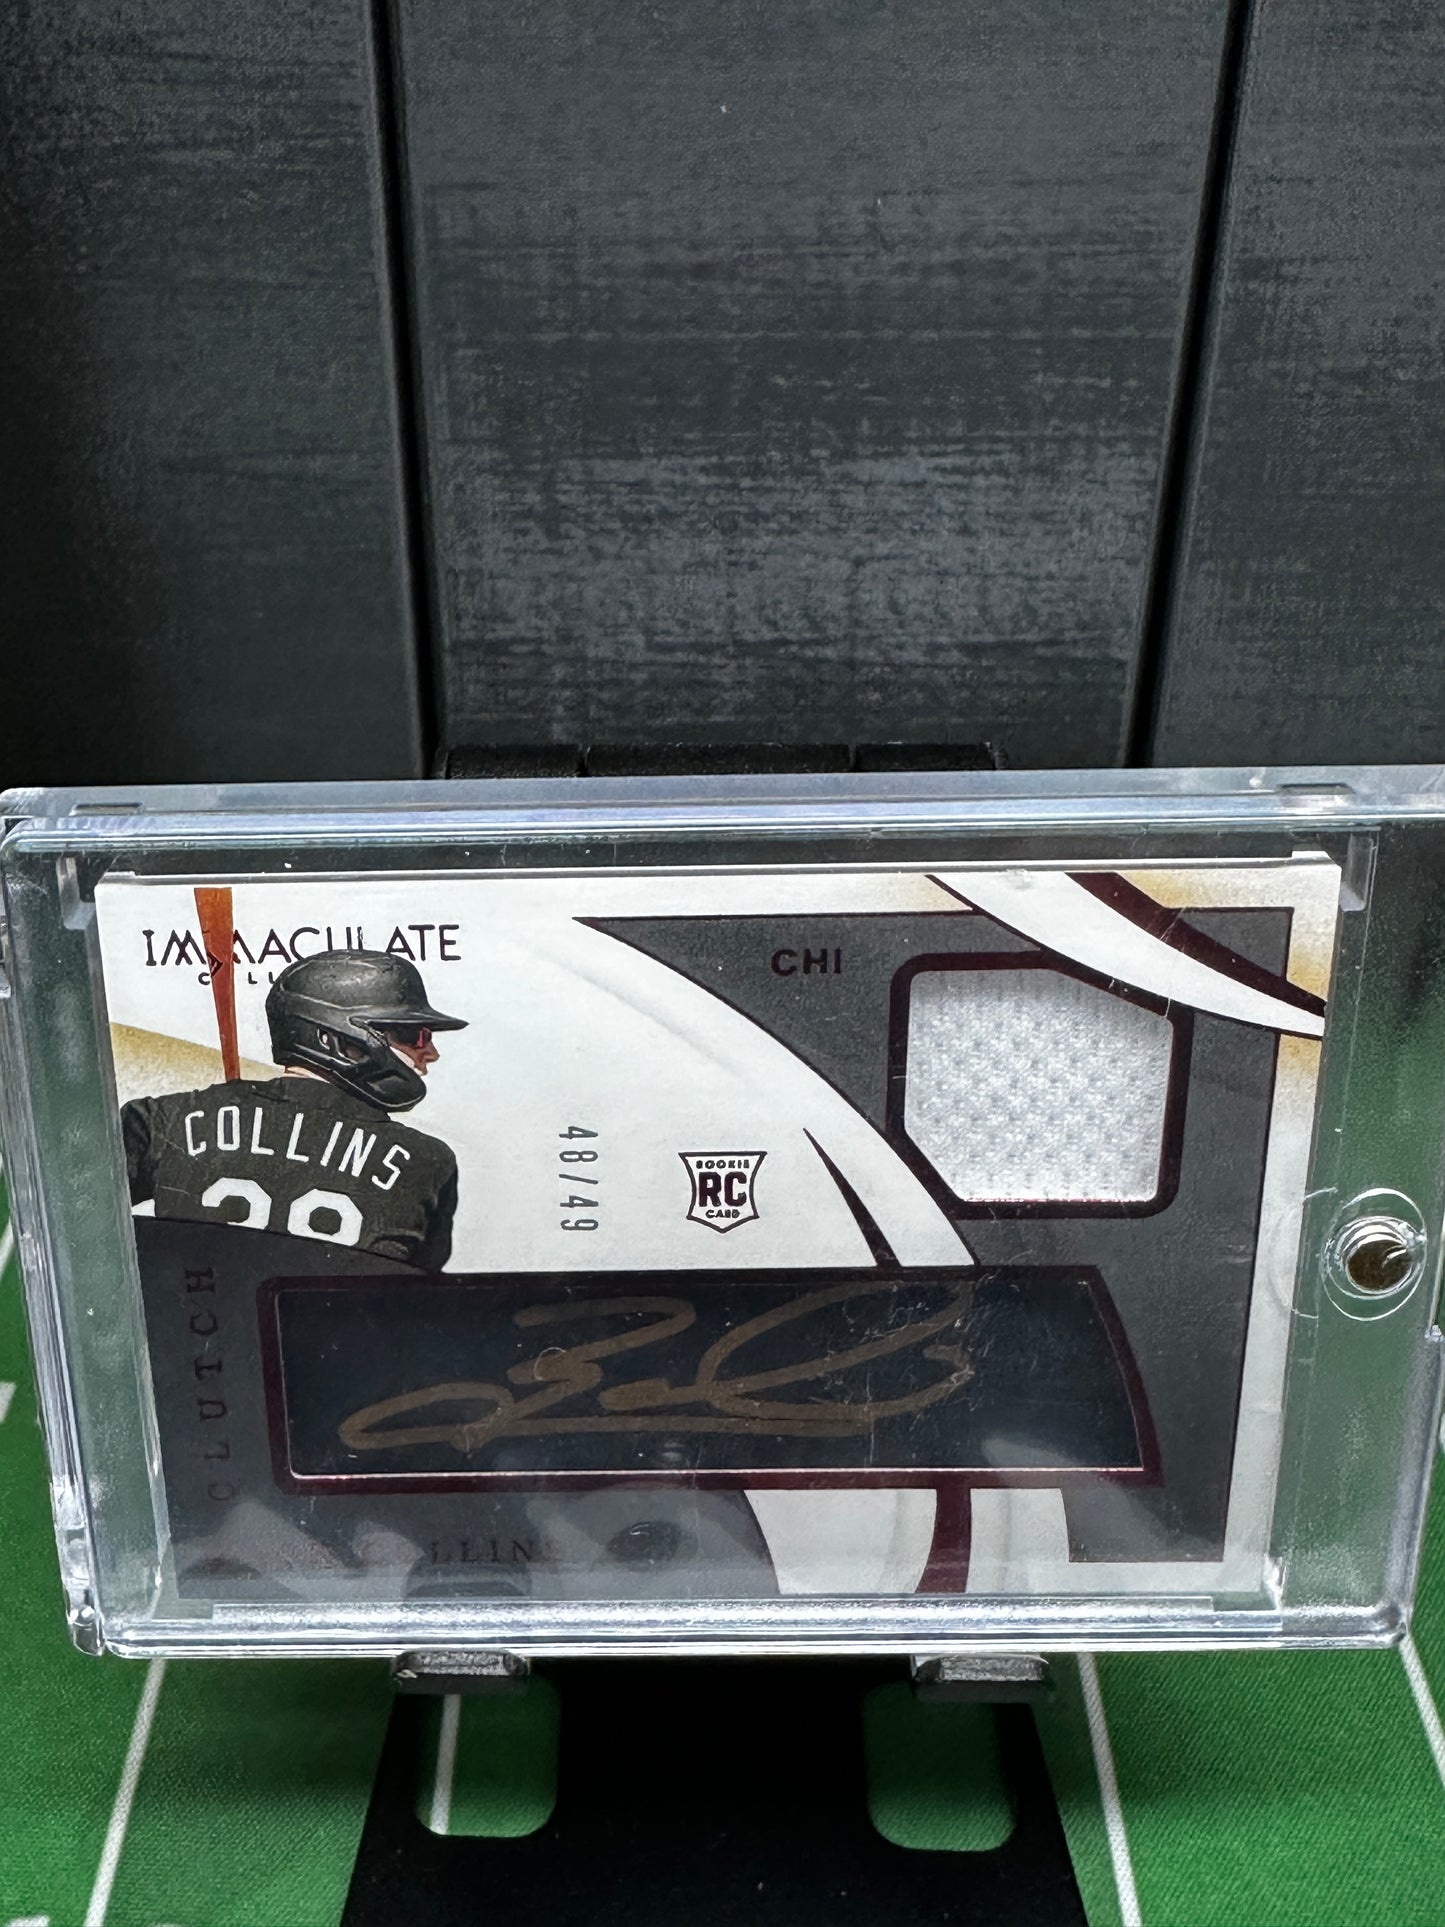 2020 PANINI IMMACULATE ZACK COLLINS AUTOGRAPH 2CLR JERSEY ROOKIE /49